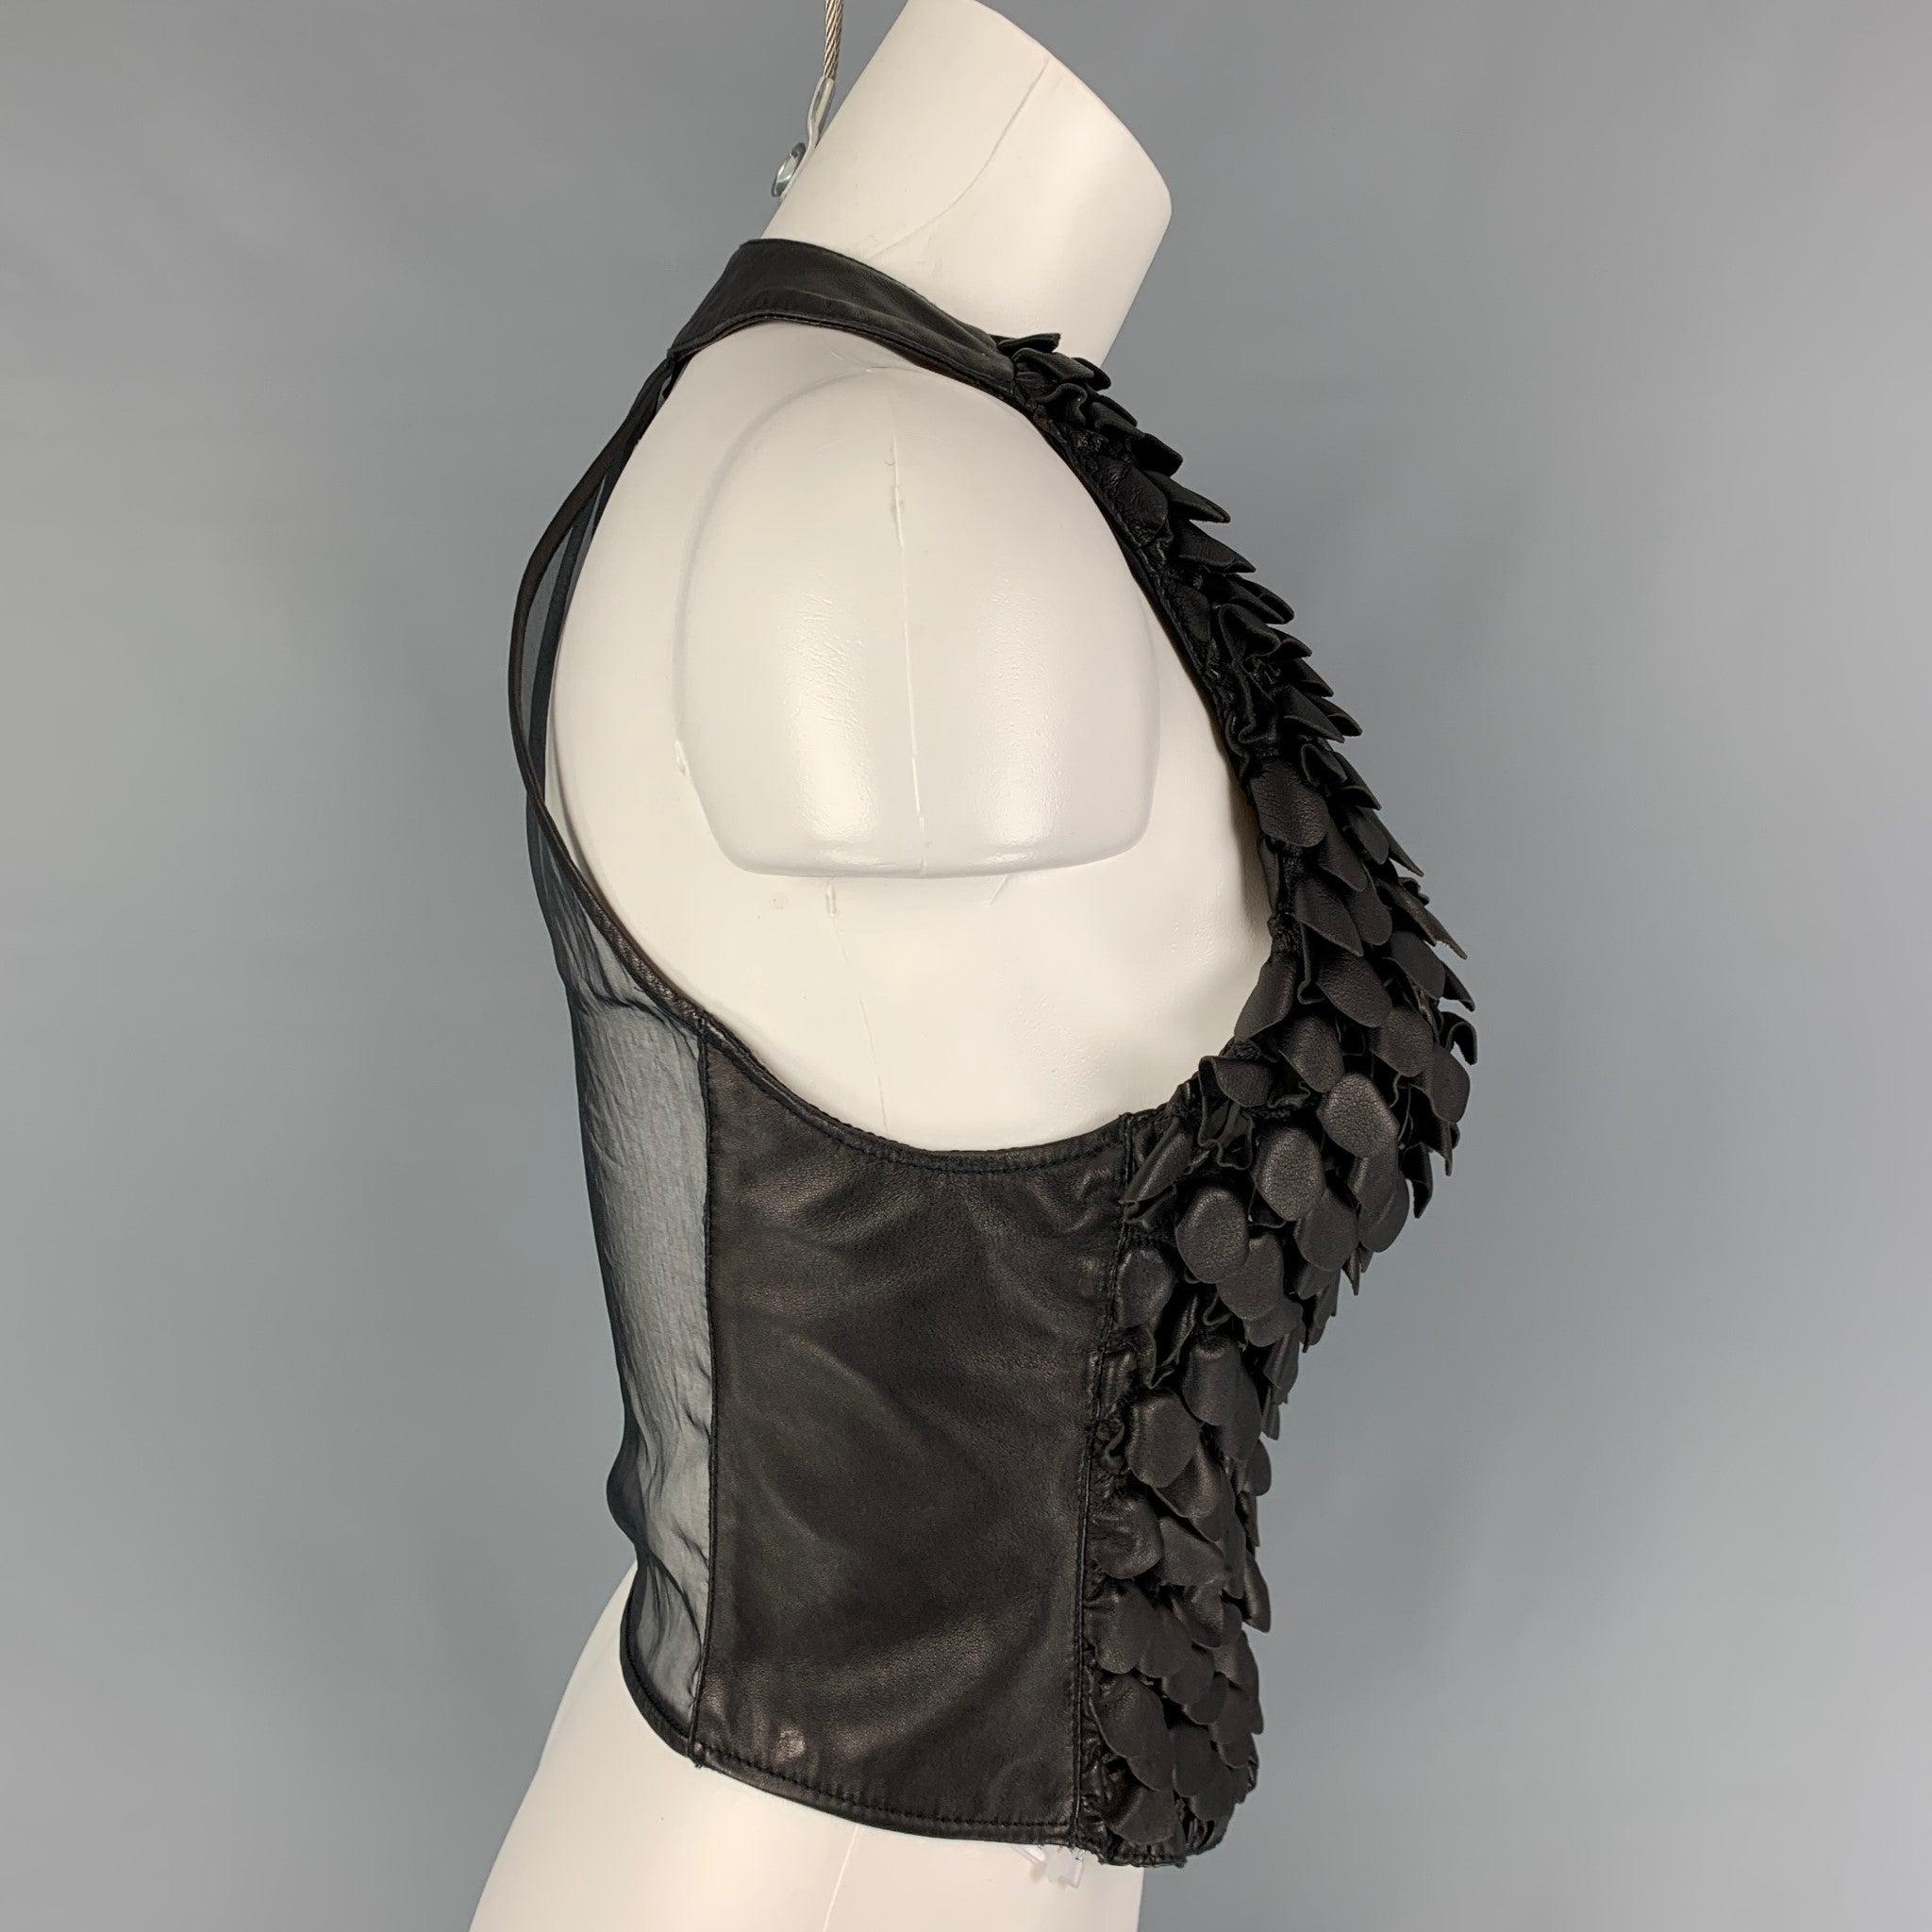 GIORGIO ARMANI dress top comes in a black leather featuring a halter style, see through back, and a buttoned closure. Made in Italy.
New With Tags.
 

Marked:   40 

Measurements: 
  Bust: 28 inches  Length: 16 inches 
  
  
 
Reference: